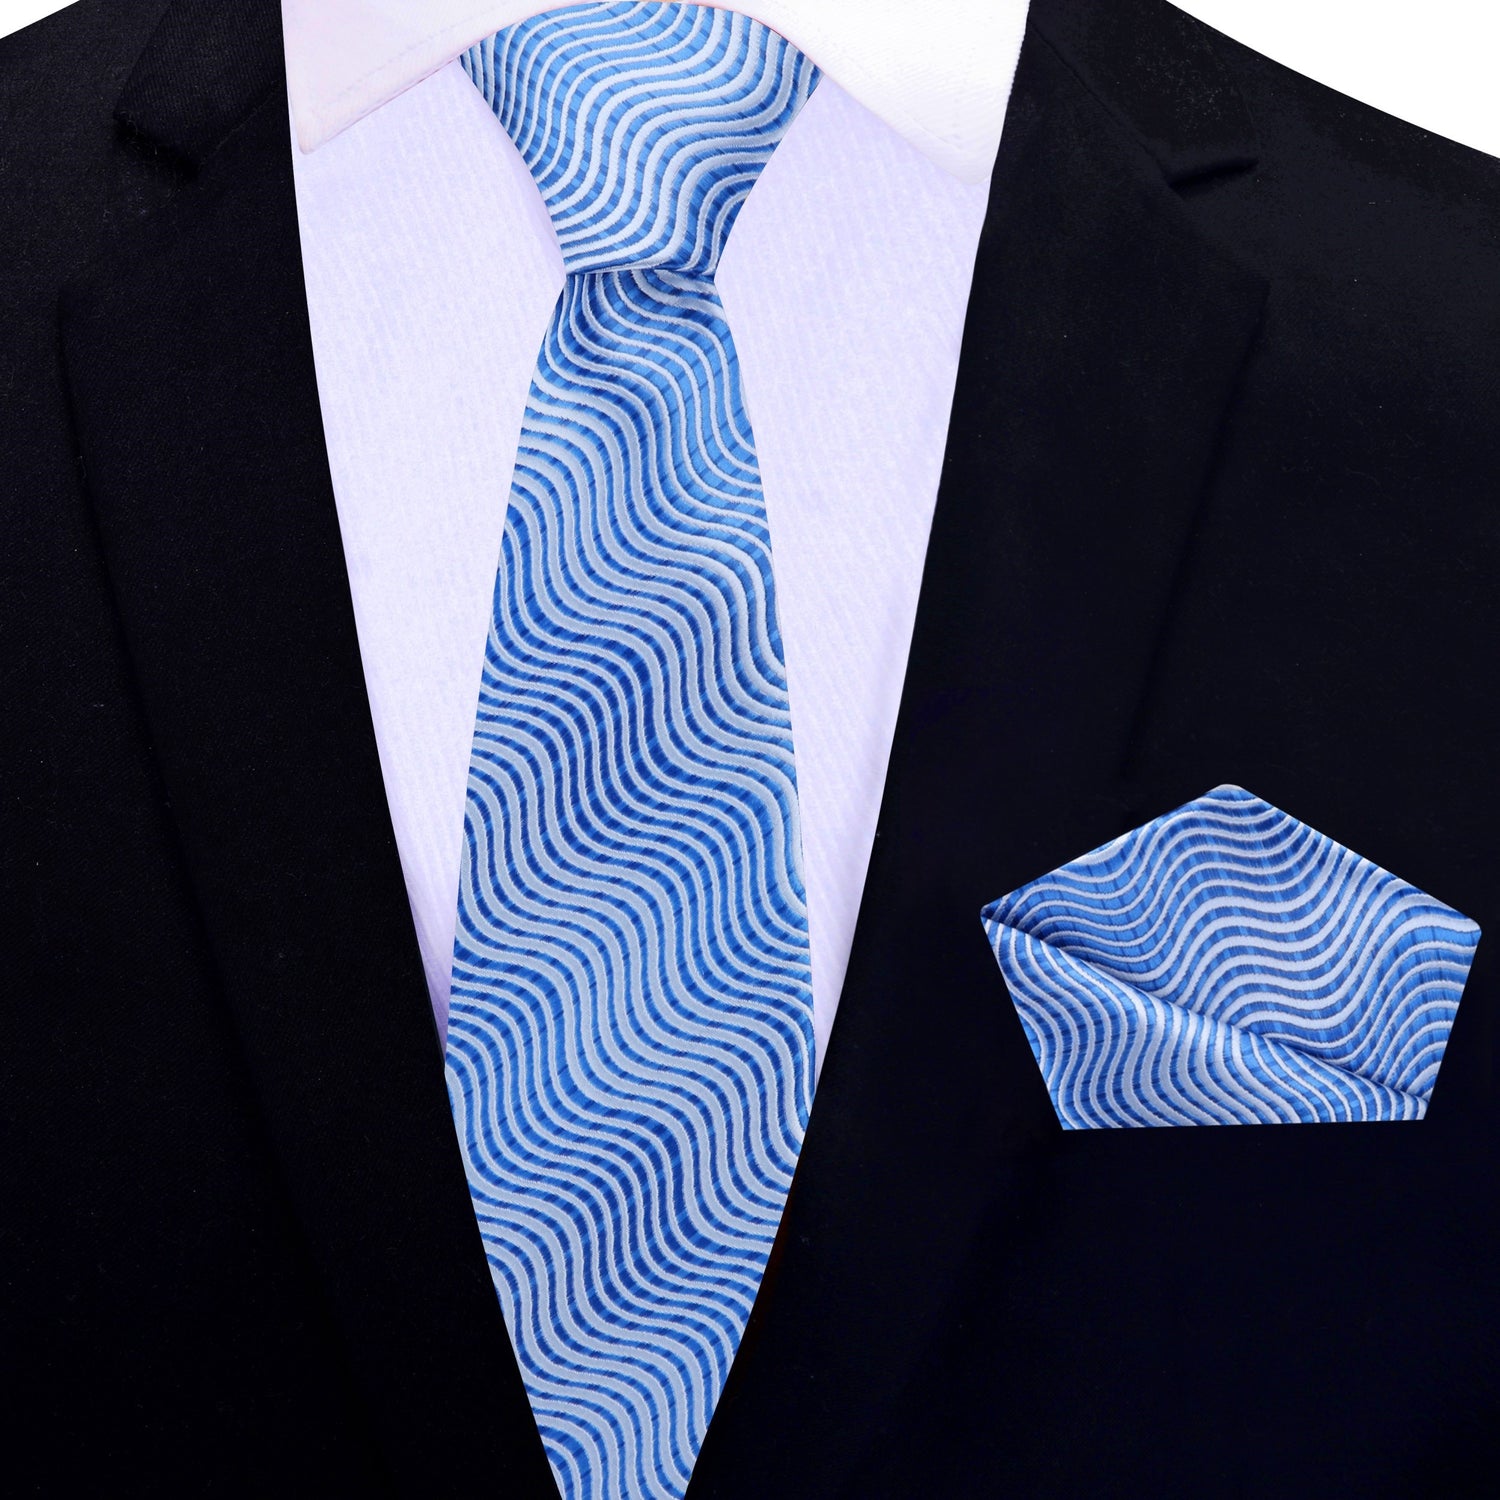 Thin View: Shades of Blue Wavy Lines Necktie with Matching Pocket Square